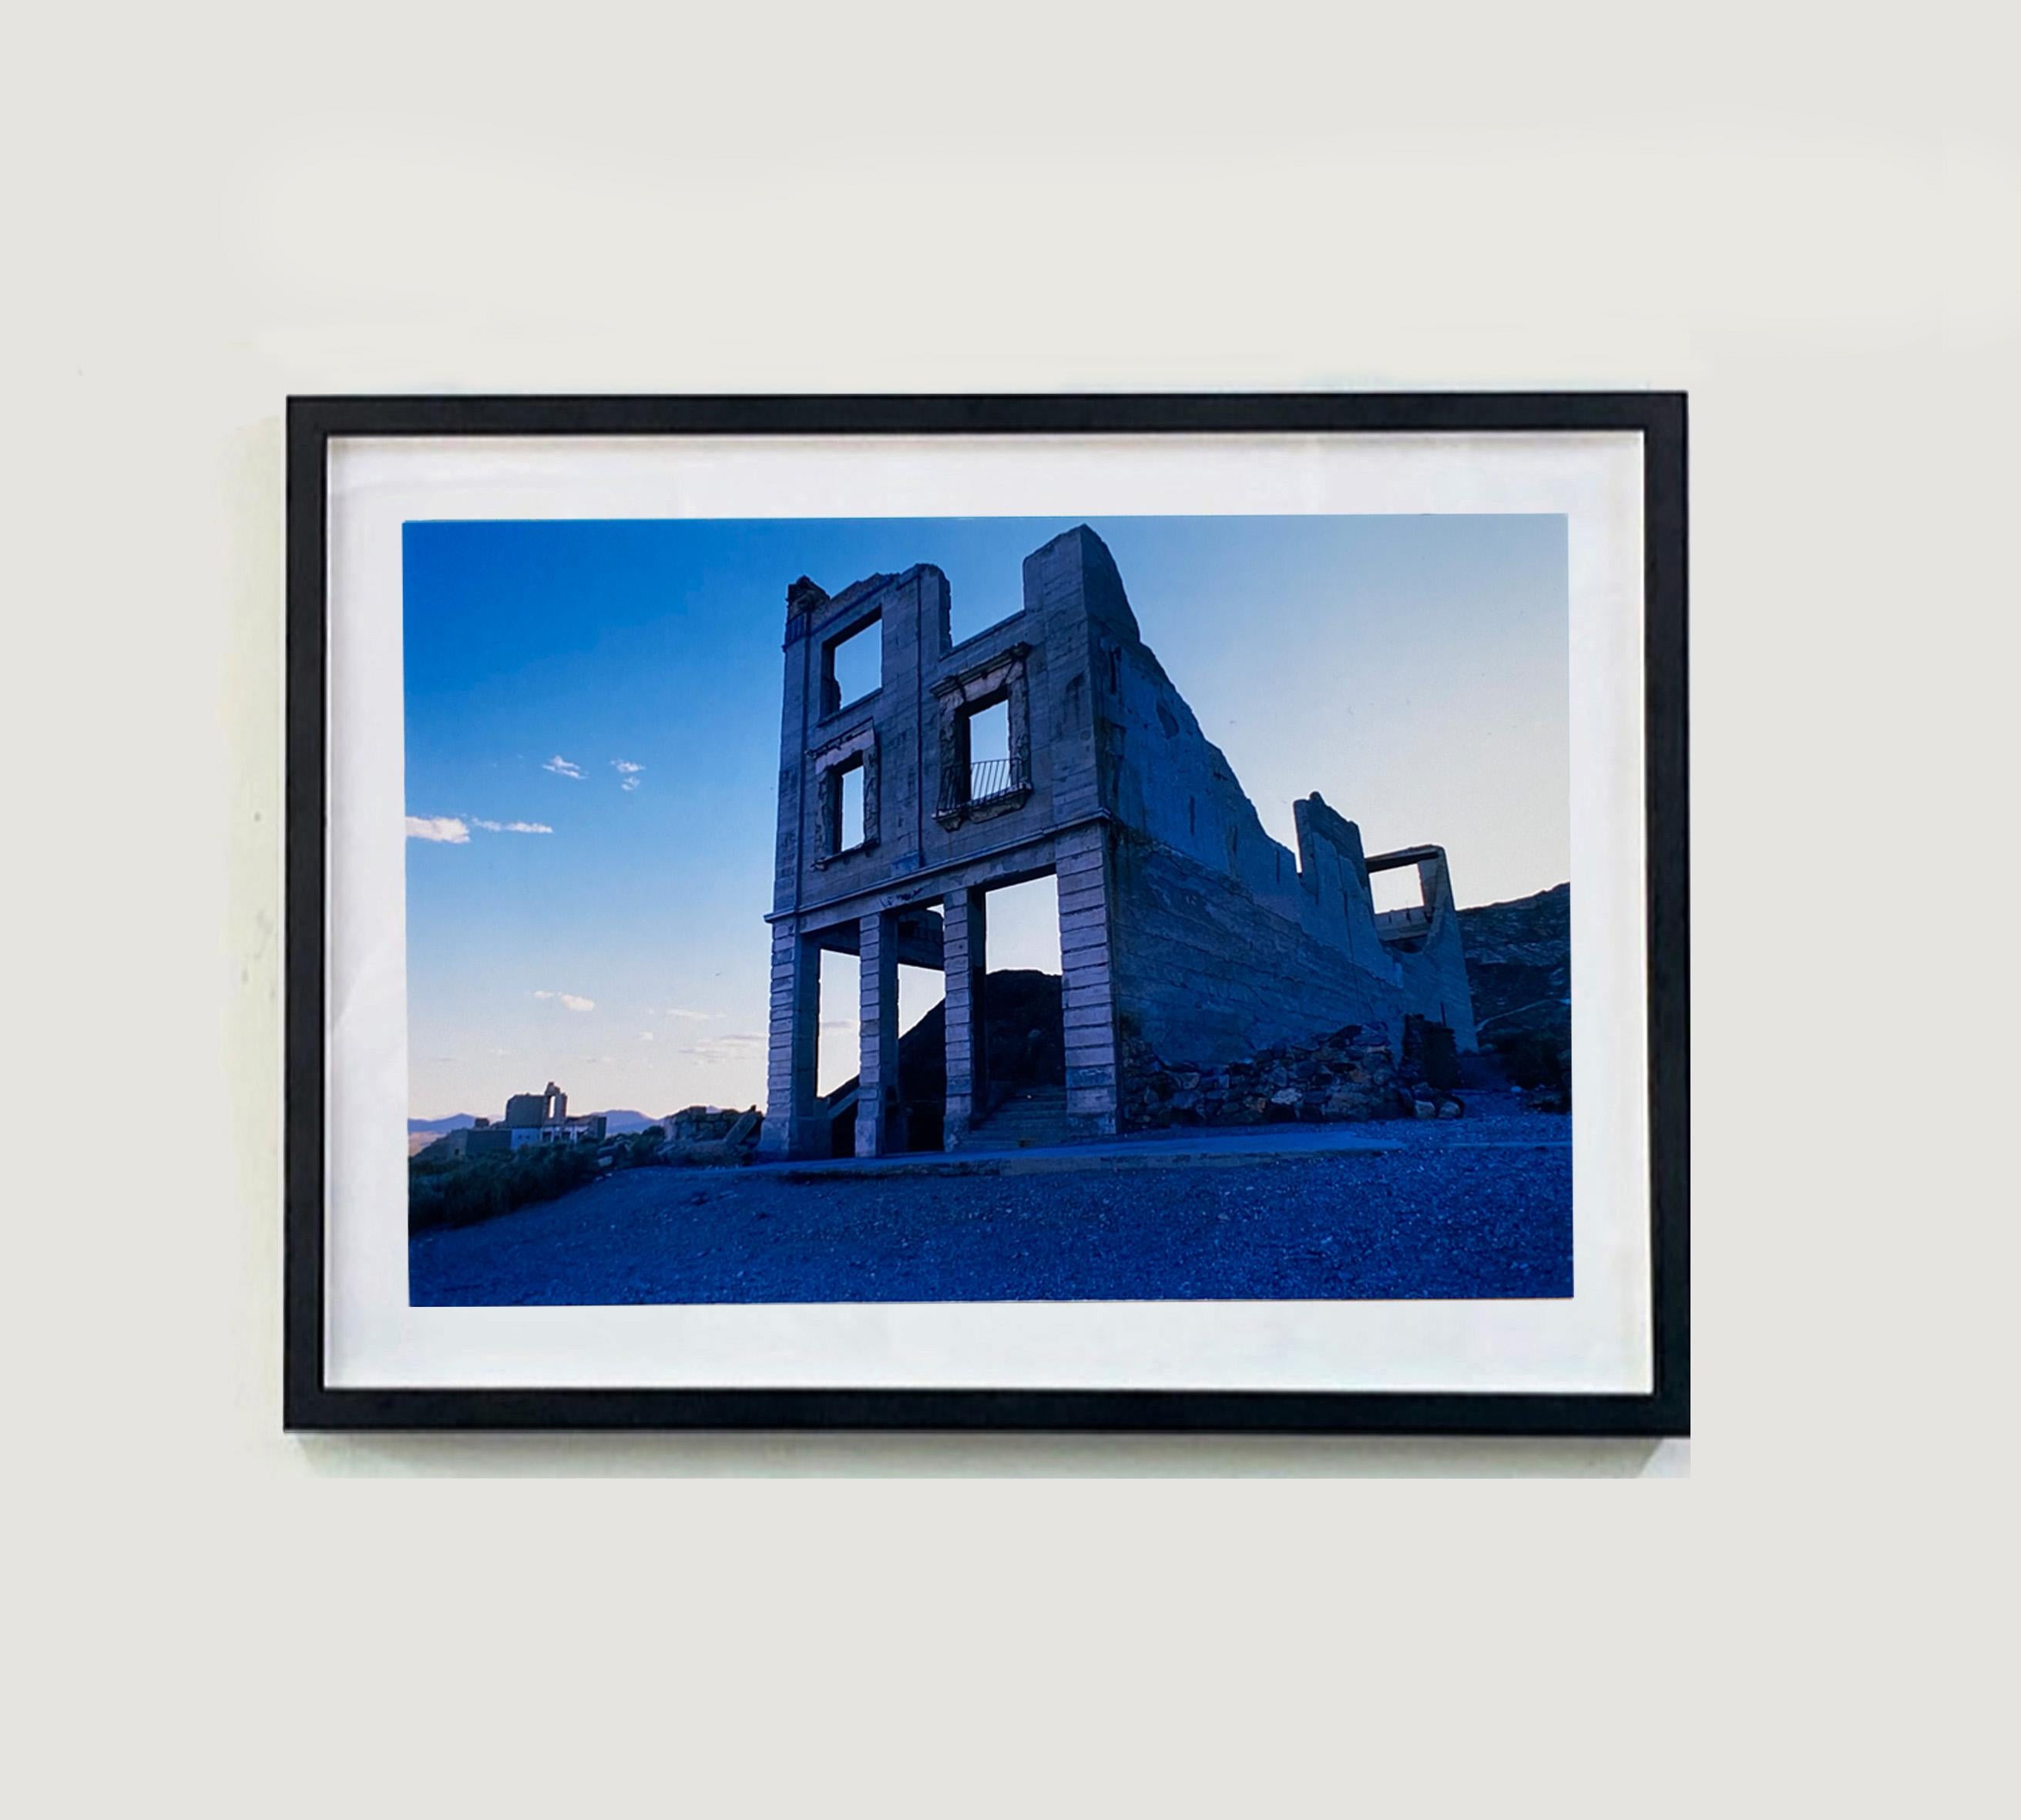 Cook Bank Building, Rhyolite, Nevada - American Architecture Color Photography - Print by Richard Heeps